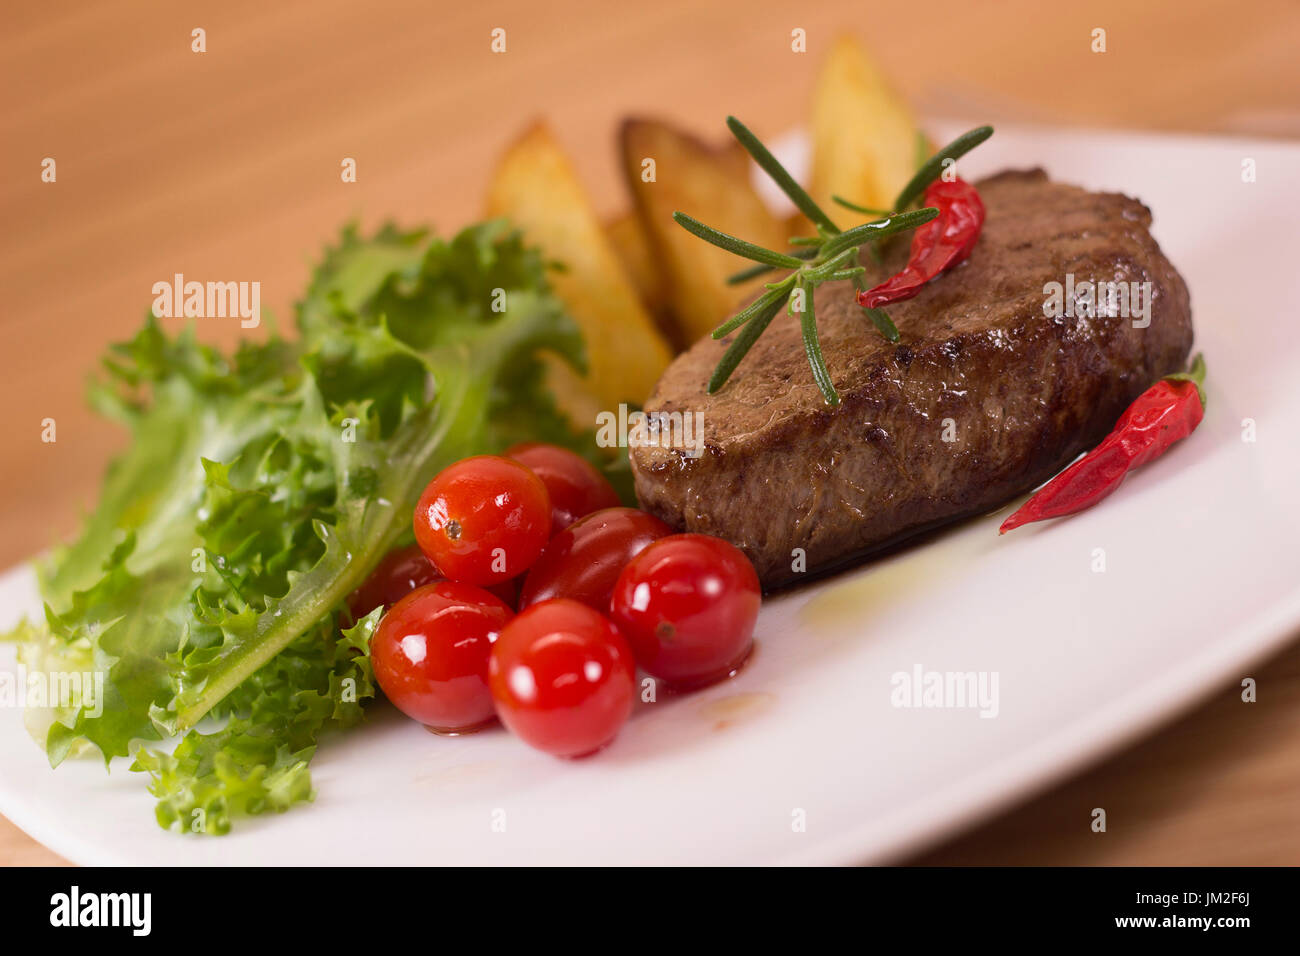 Fillet mignon steak with green salad and home made potatoes. Selective focus on meat. Stock Photo